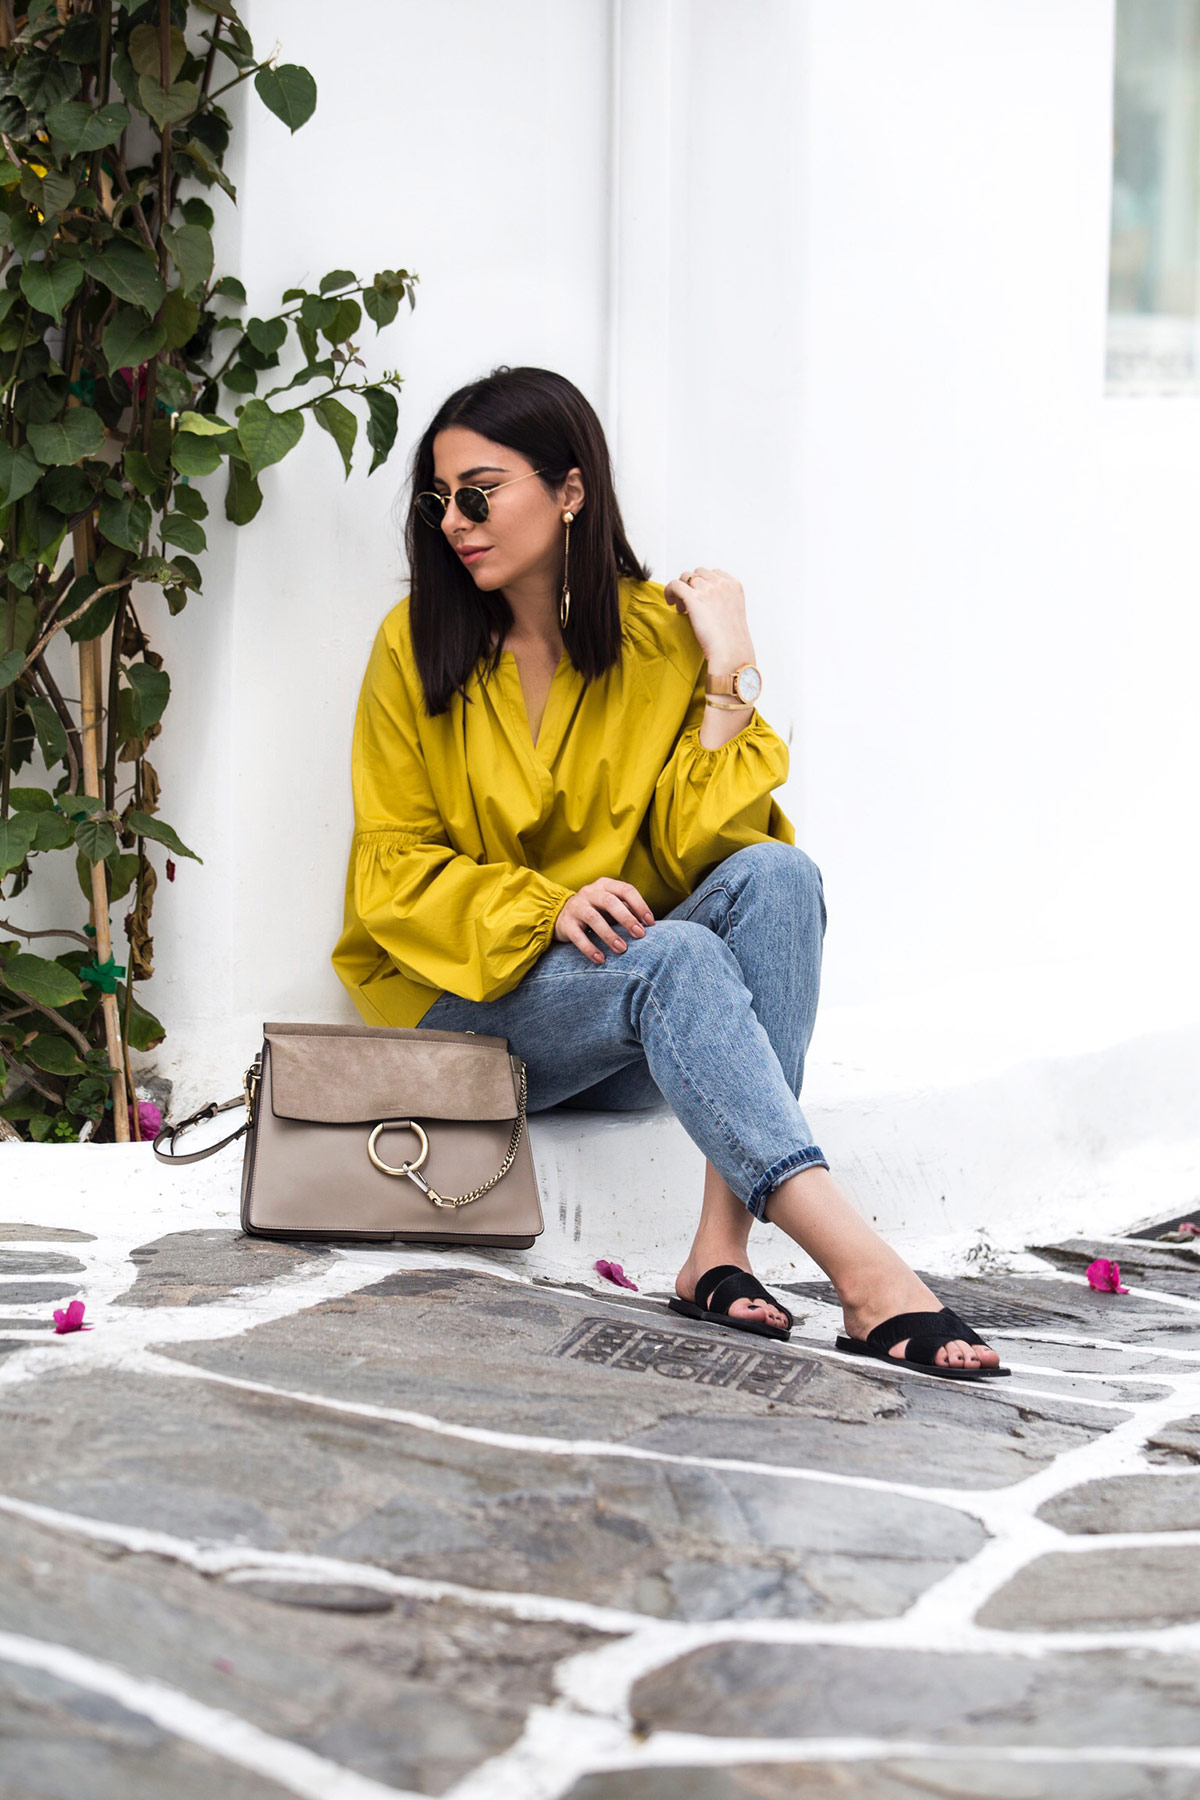 Greek islands fashion in Mykonos - Stella Asteria  wearing a casual chic outfit with Chloé Faye bag